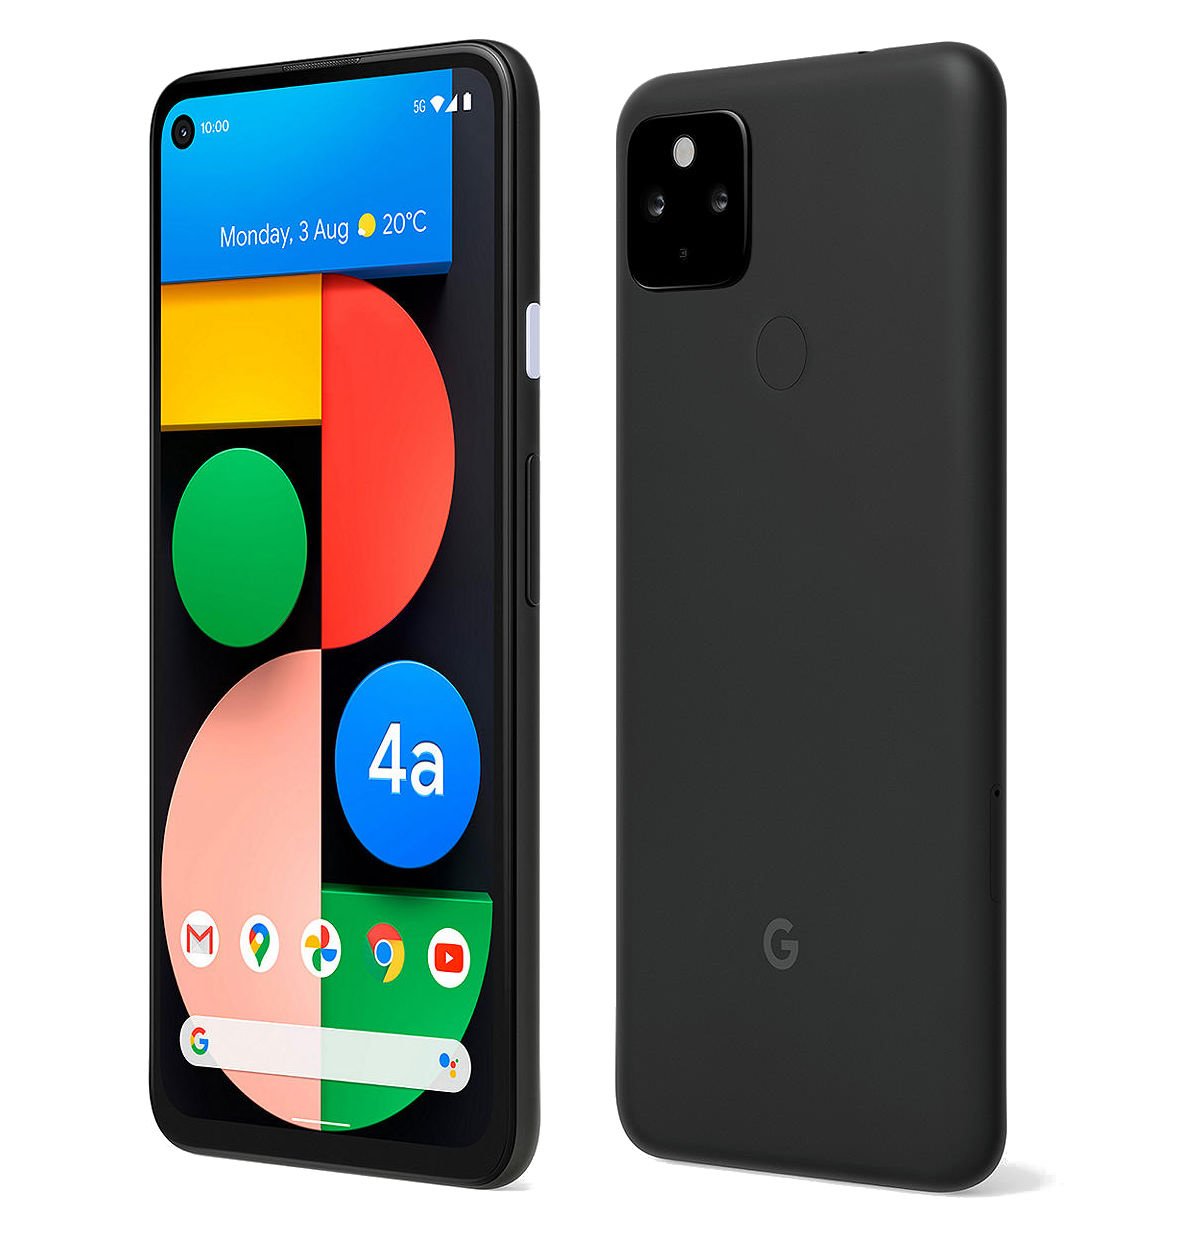 Google Pixel 4a 5G With Snapdragon 765G Launched: Price, Specifications ...